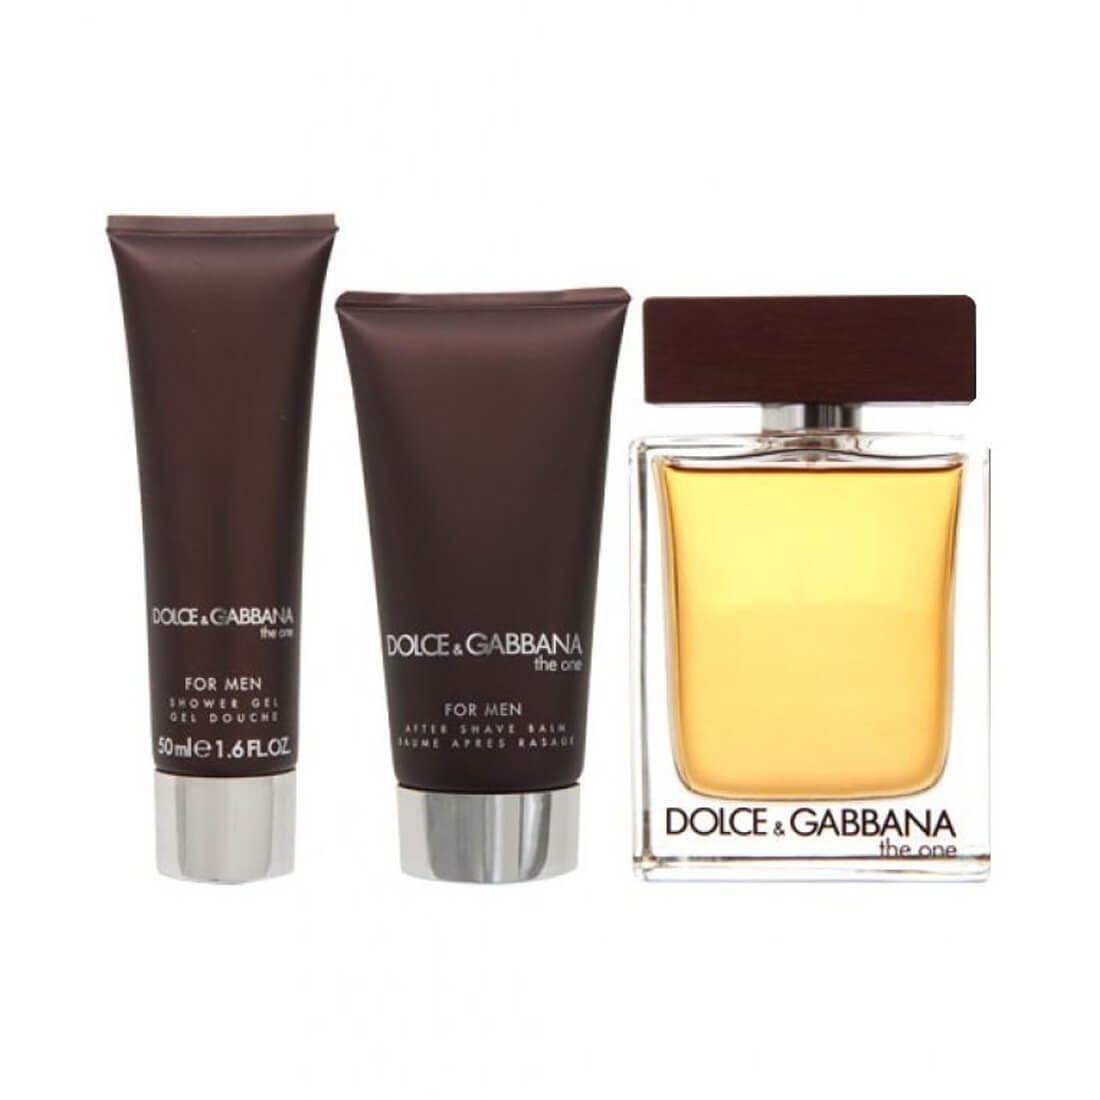 dolce gabbana the one travel edition